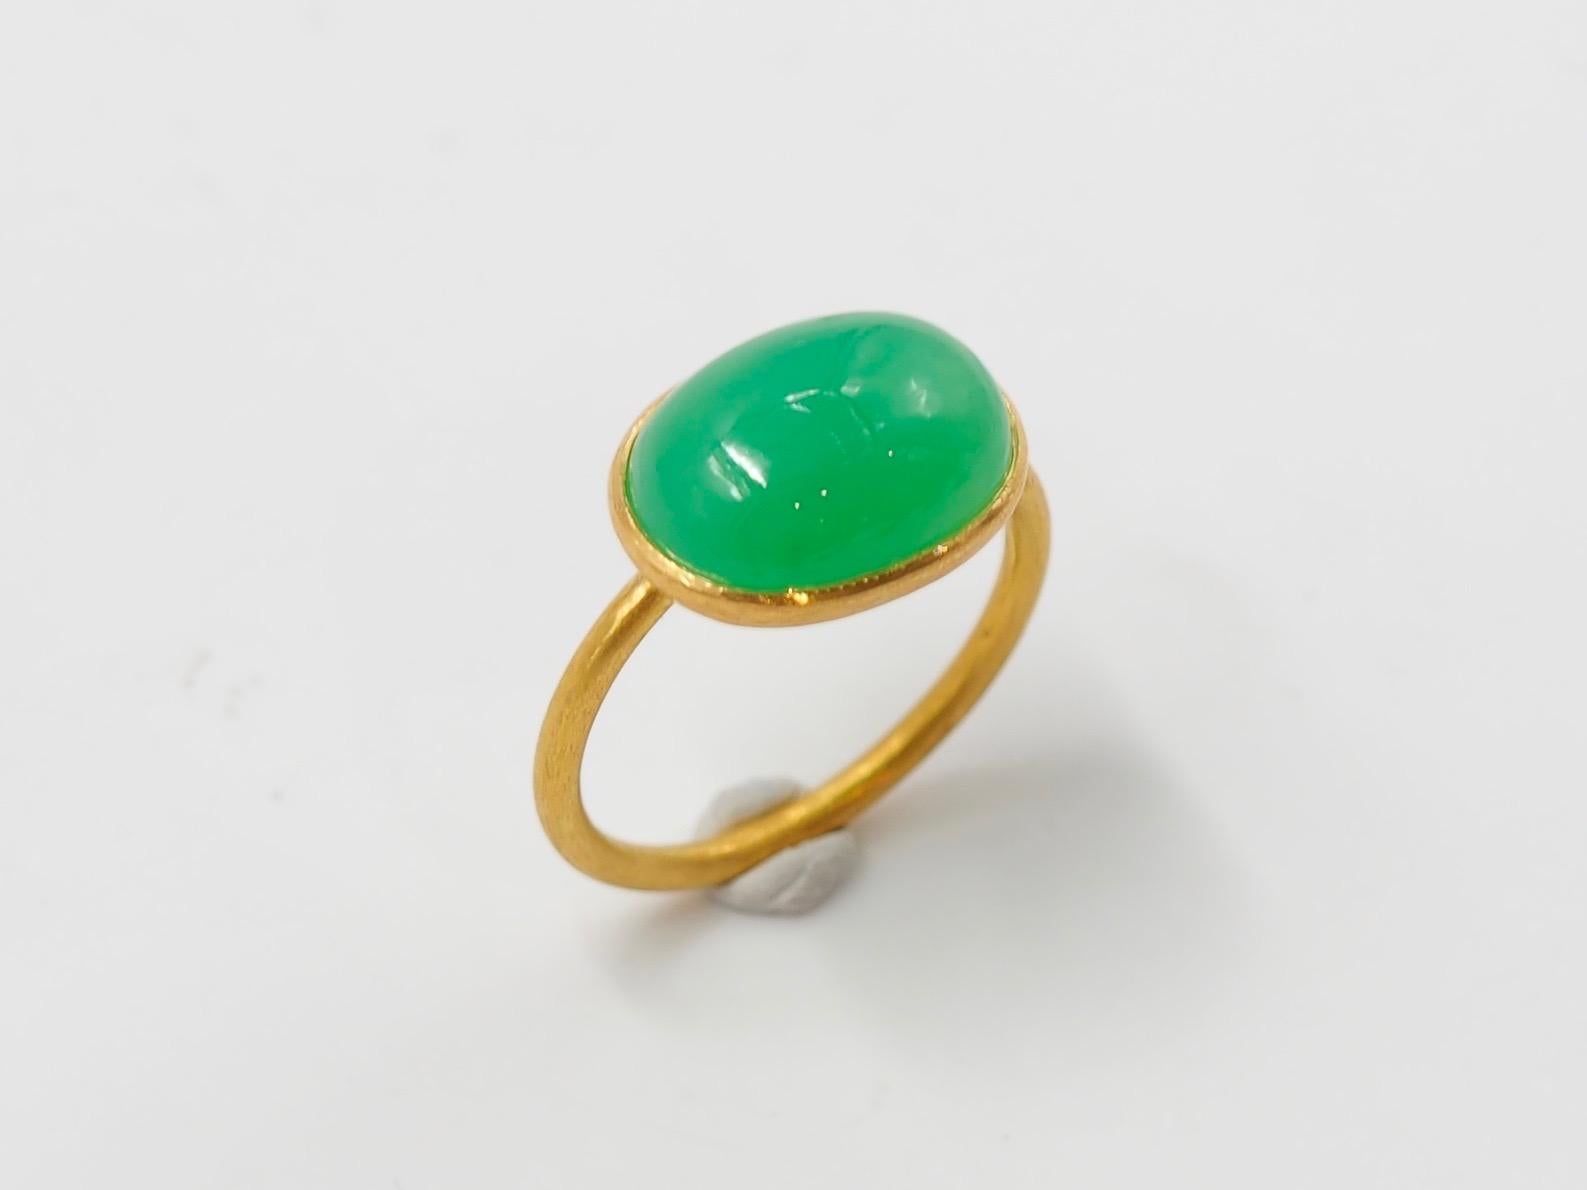 This simple ring by Scrives is composed of a large green chalcedony cabochon of 5.93 cts. 
The stone is set in a 22kt closed gold setting.
This chrysoprase is natural, not dyed and has natural & typical small inclusions.

This ring is handmade with